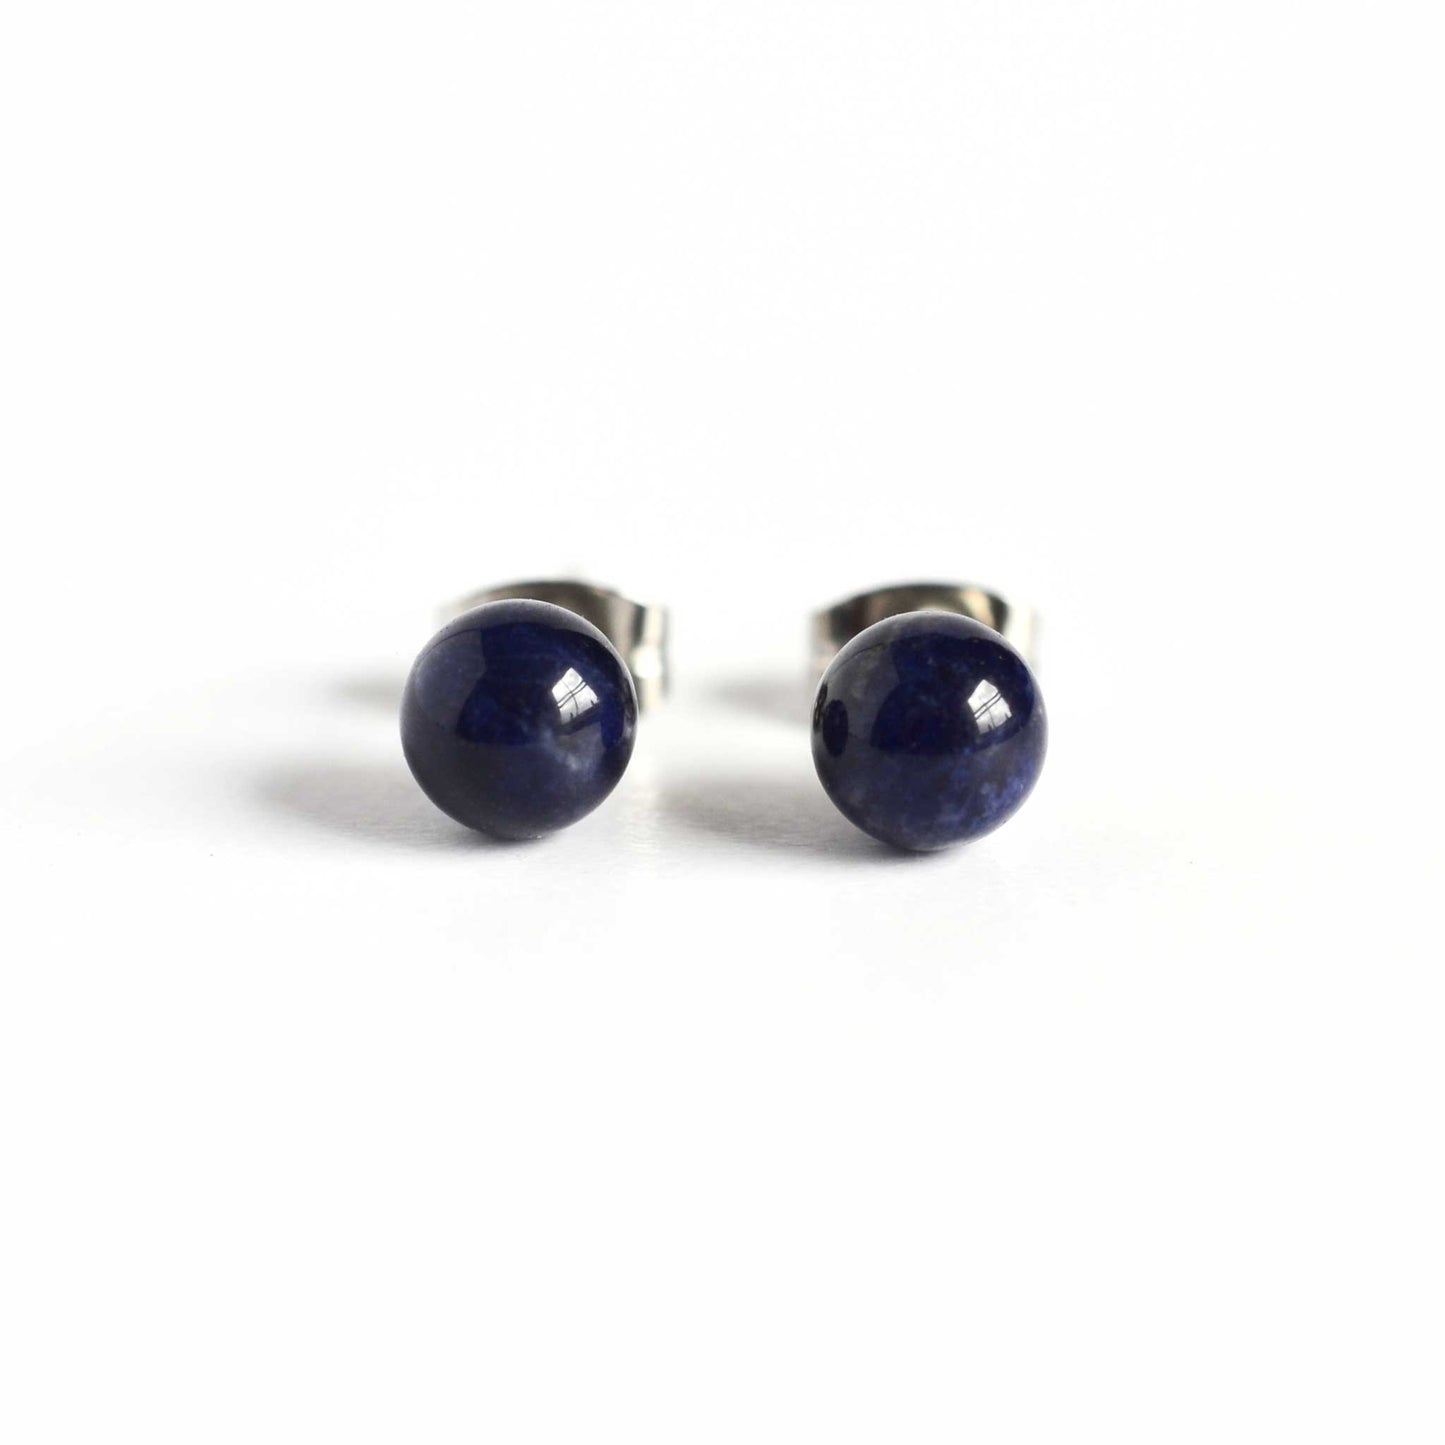 Front view of Sodalite stud earrings blue stone on white background